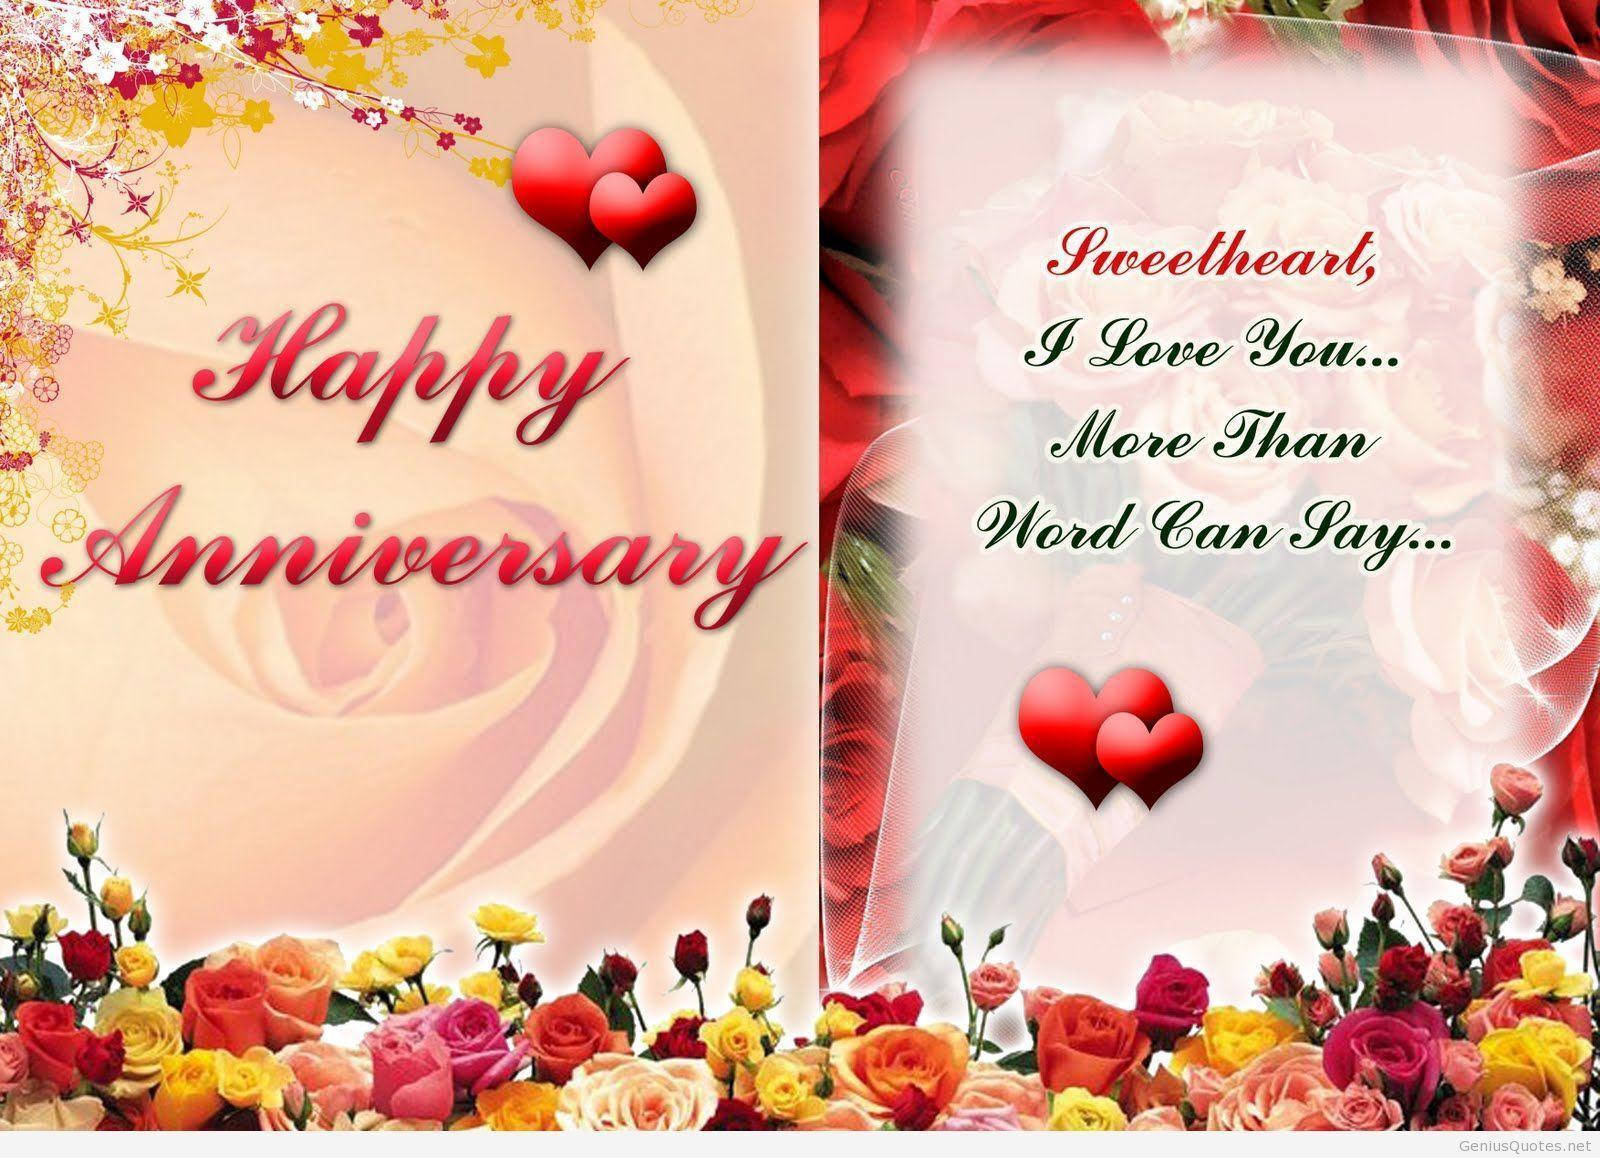 Happy Anniversary Floral Greeting Card Background